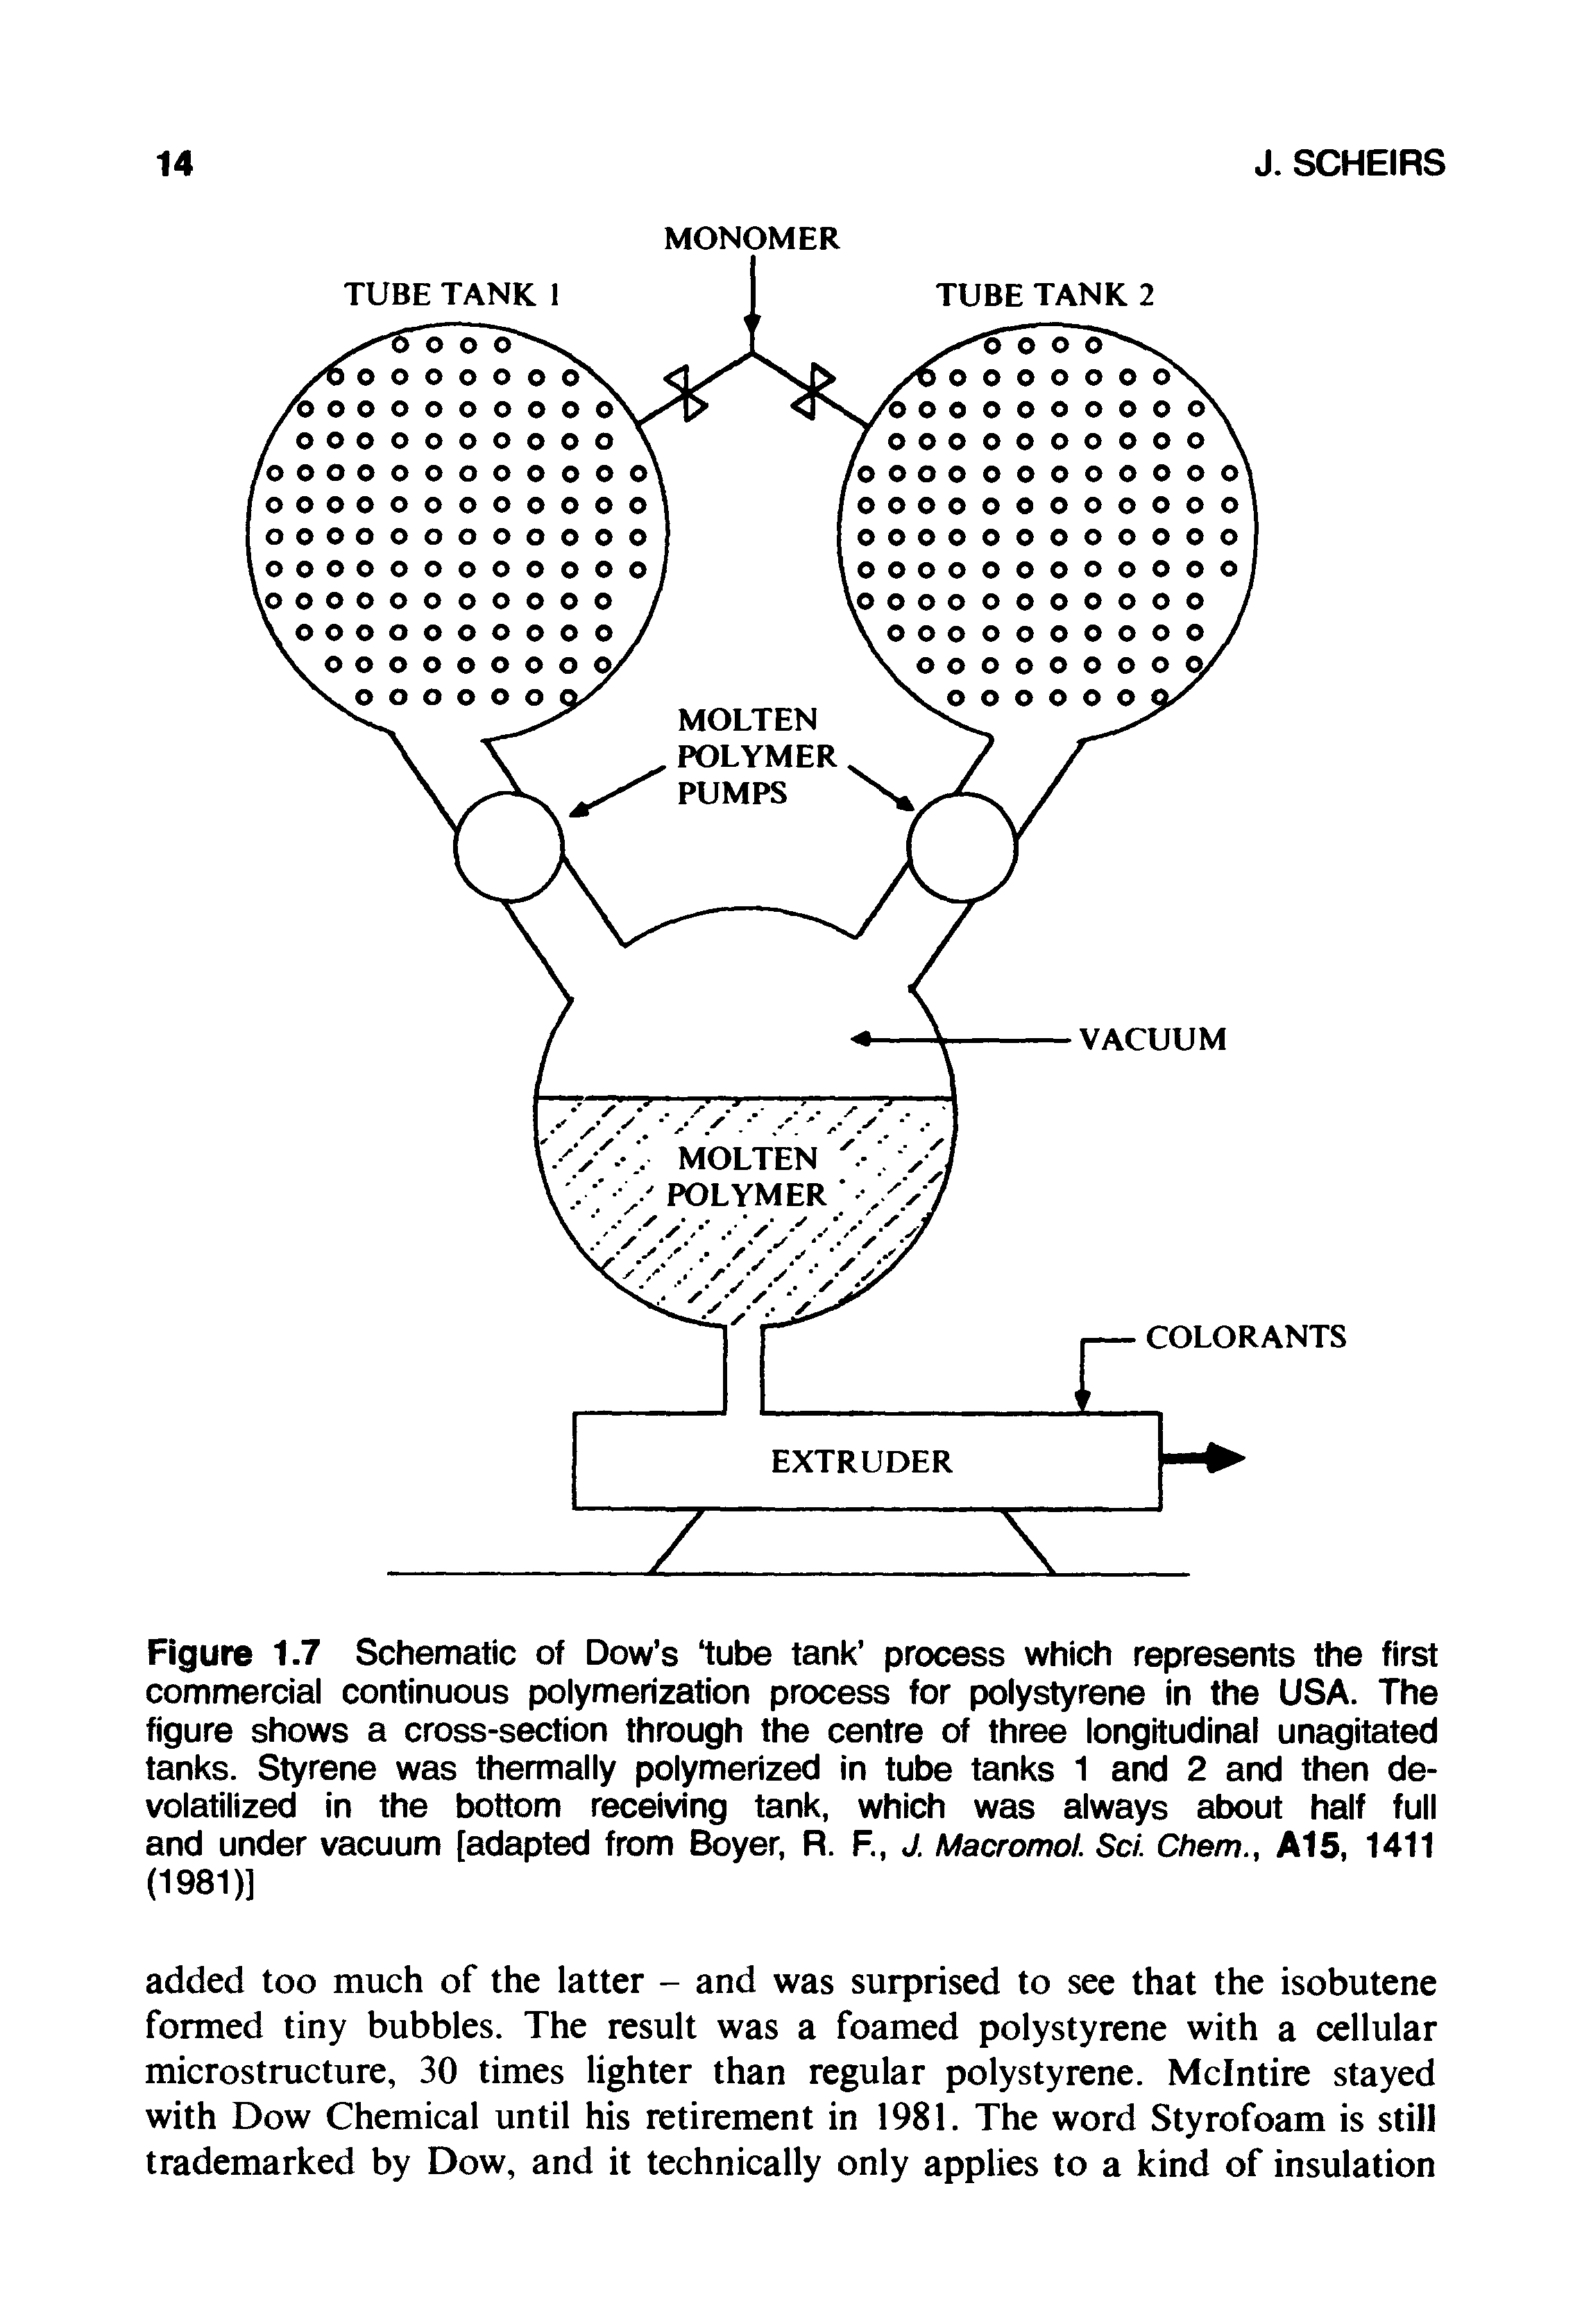 Figure 1.7 Schematic of Dow s tube tank process which represents the first commercial continuous polymerization process for polystyrene in the USA. The figure shows a cross-section through the centre of three longitudinal unagitated tanks. Styrene was thermally polymerized in tube tanks 1 and 2 and then devolatilized in the bottom receiving tank, which was always about half full and under vacuum [adapted from Boyer, R. F., J. Macromol. Sci. Chem., A15, 1411 (1981)]...